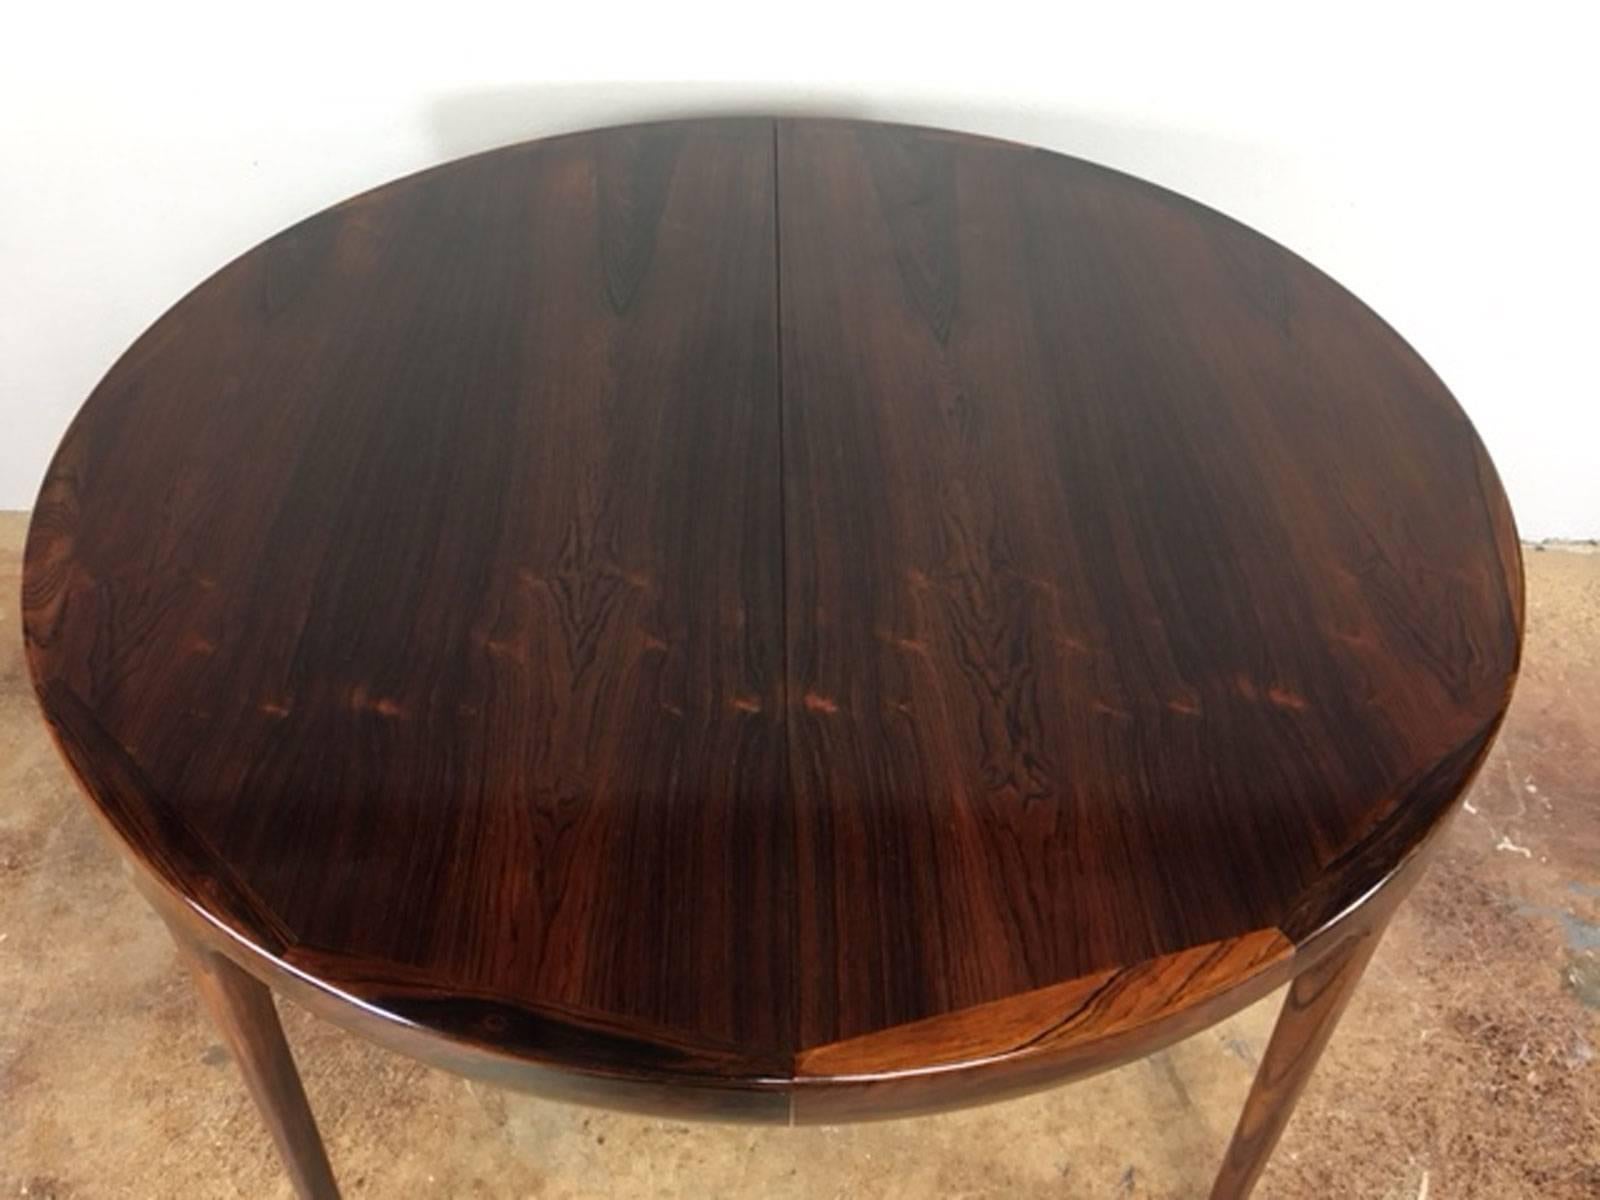 Ib Kofod-Larsen rosewood dining table with three extension leaves. Each leave is 19.5 inches and when used increases the table width from 47 inches to 105.5 inches. Excellent condition.